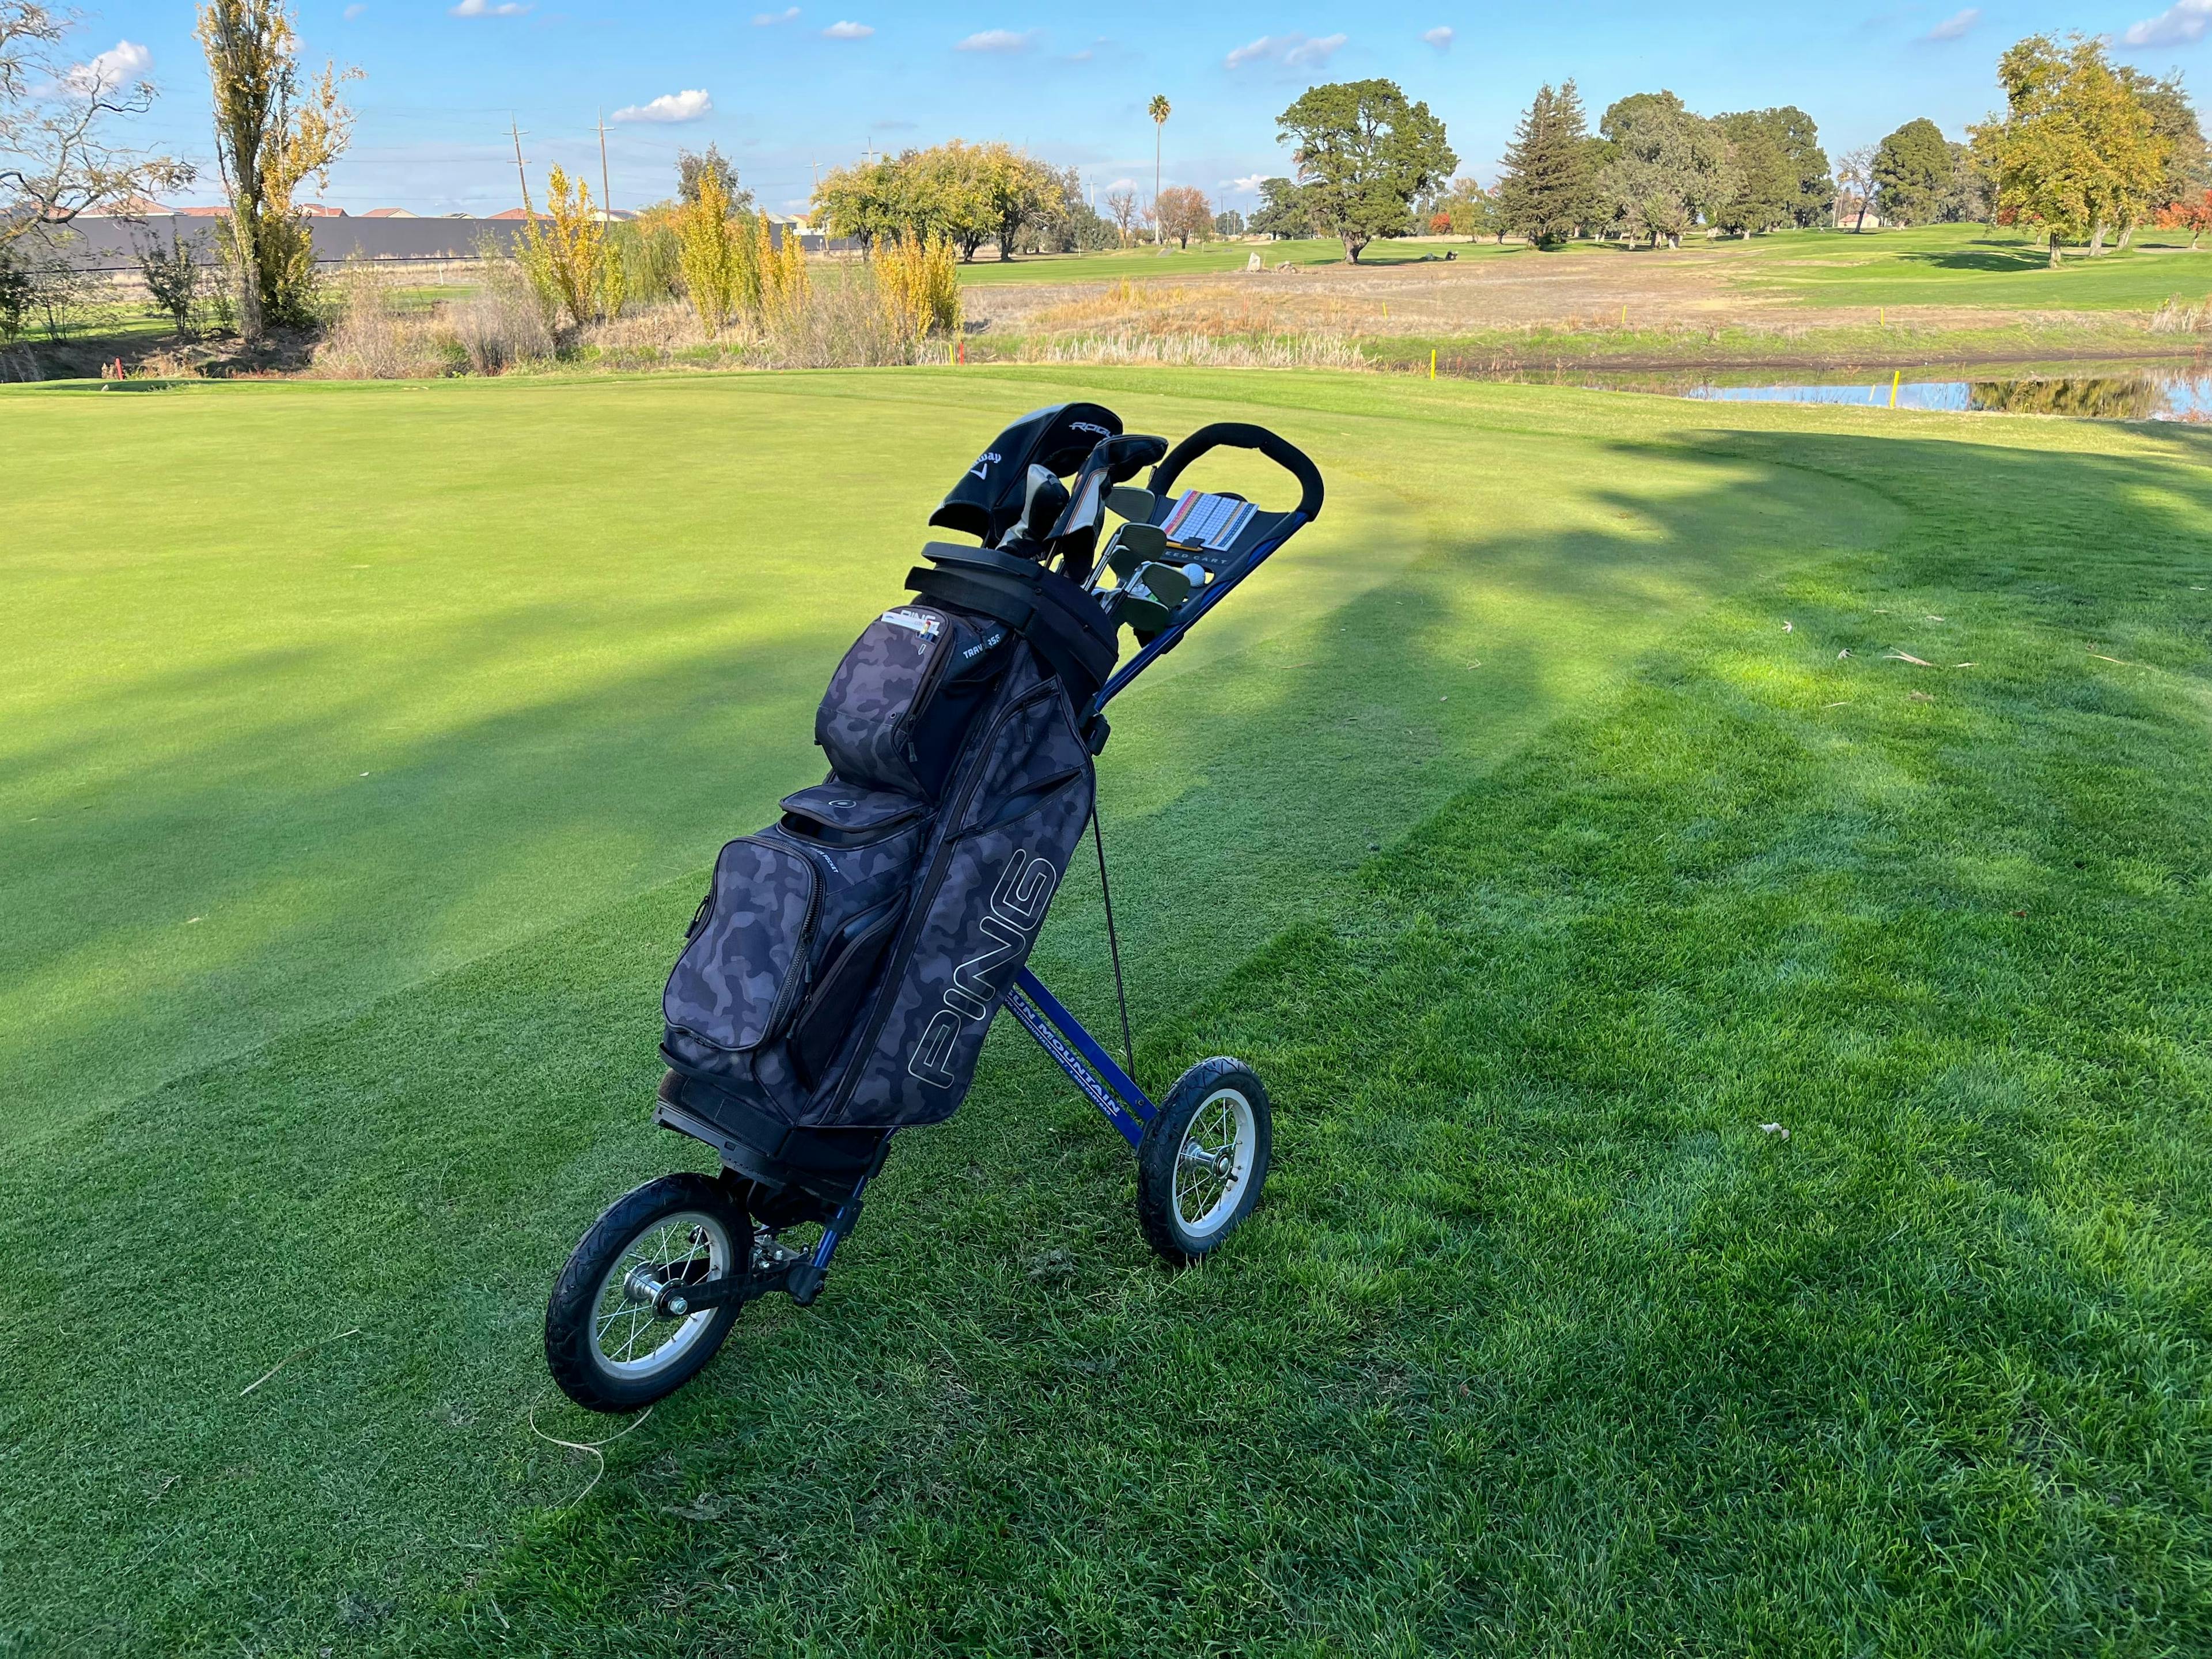 Consider joining the "Push Cart Mafia" to conveniently transport your golf equipment on the course.